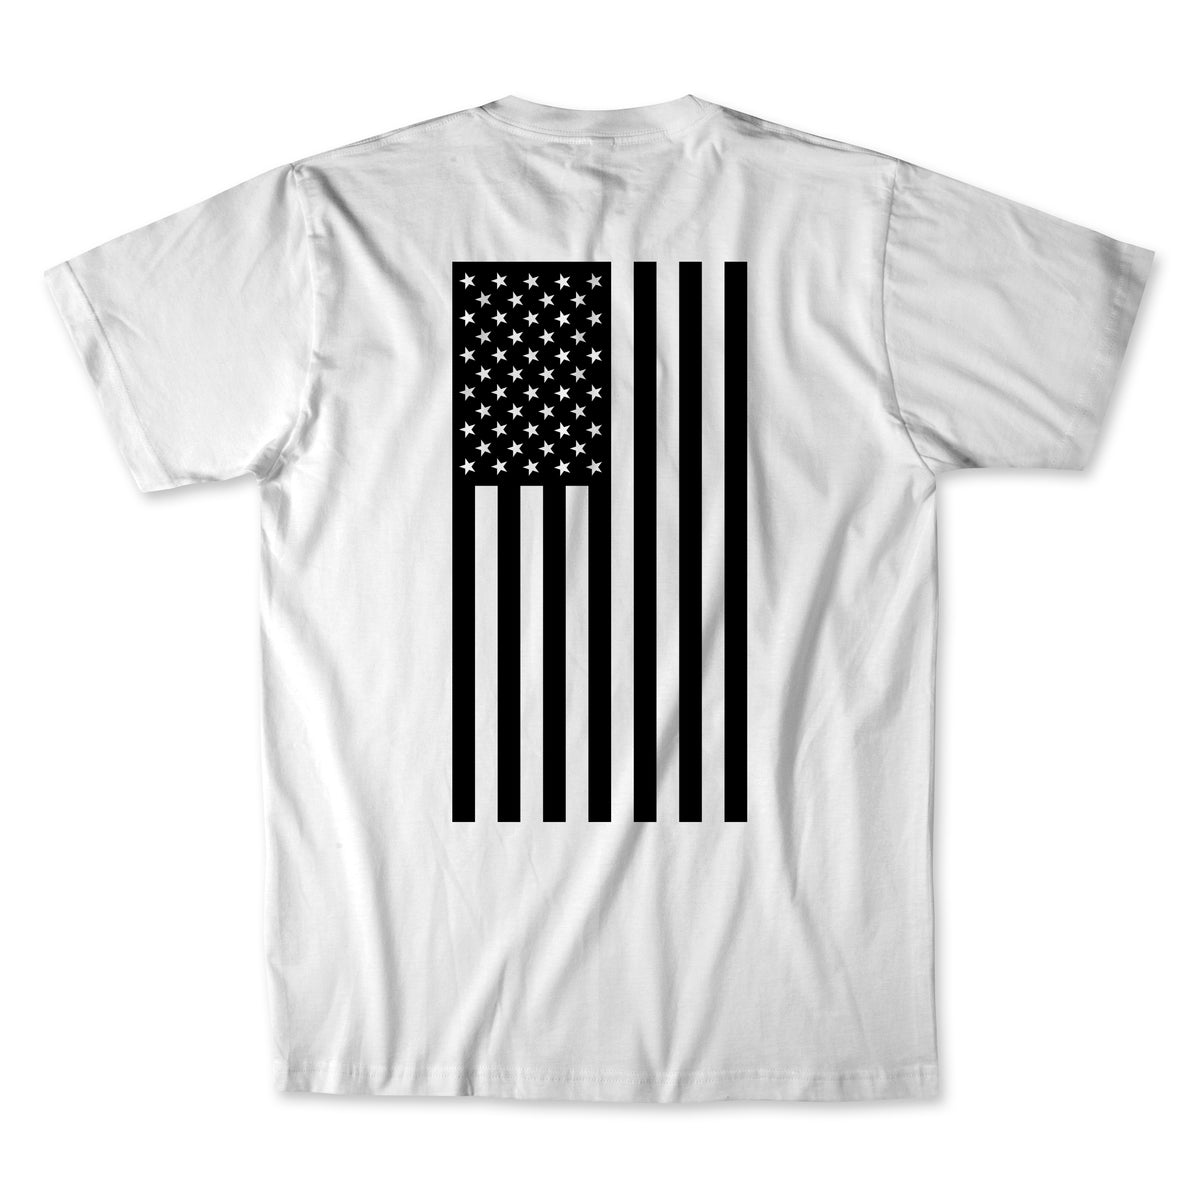 Flag T-Shirt Men's T-Shirt First Manufacturing Company S WHT 